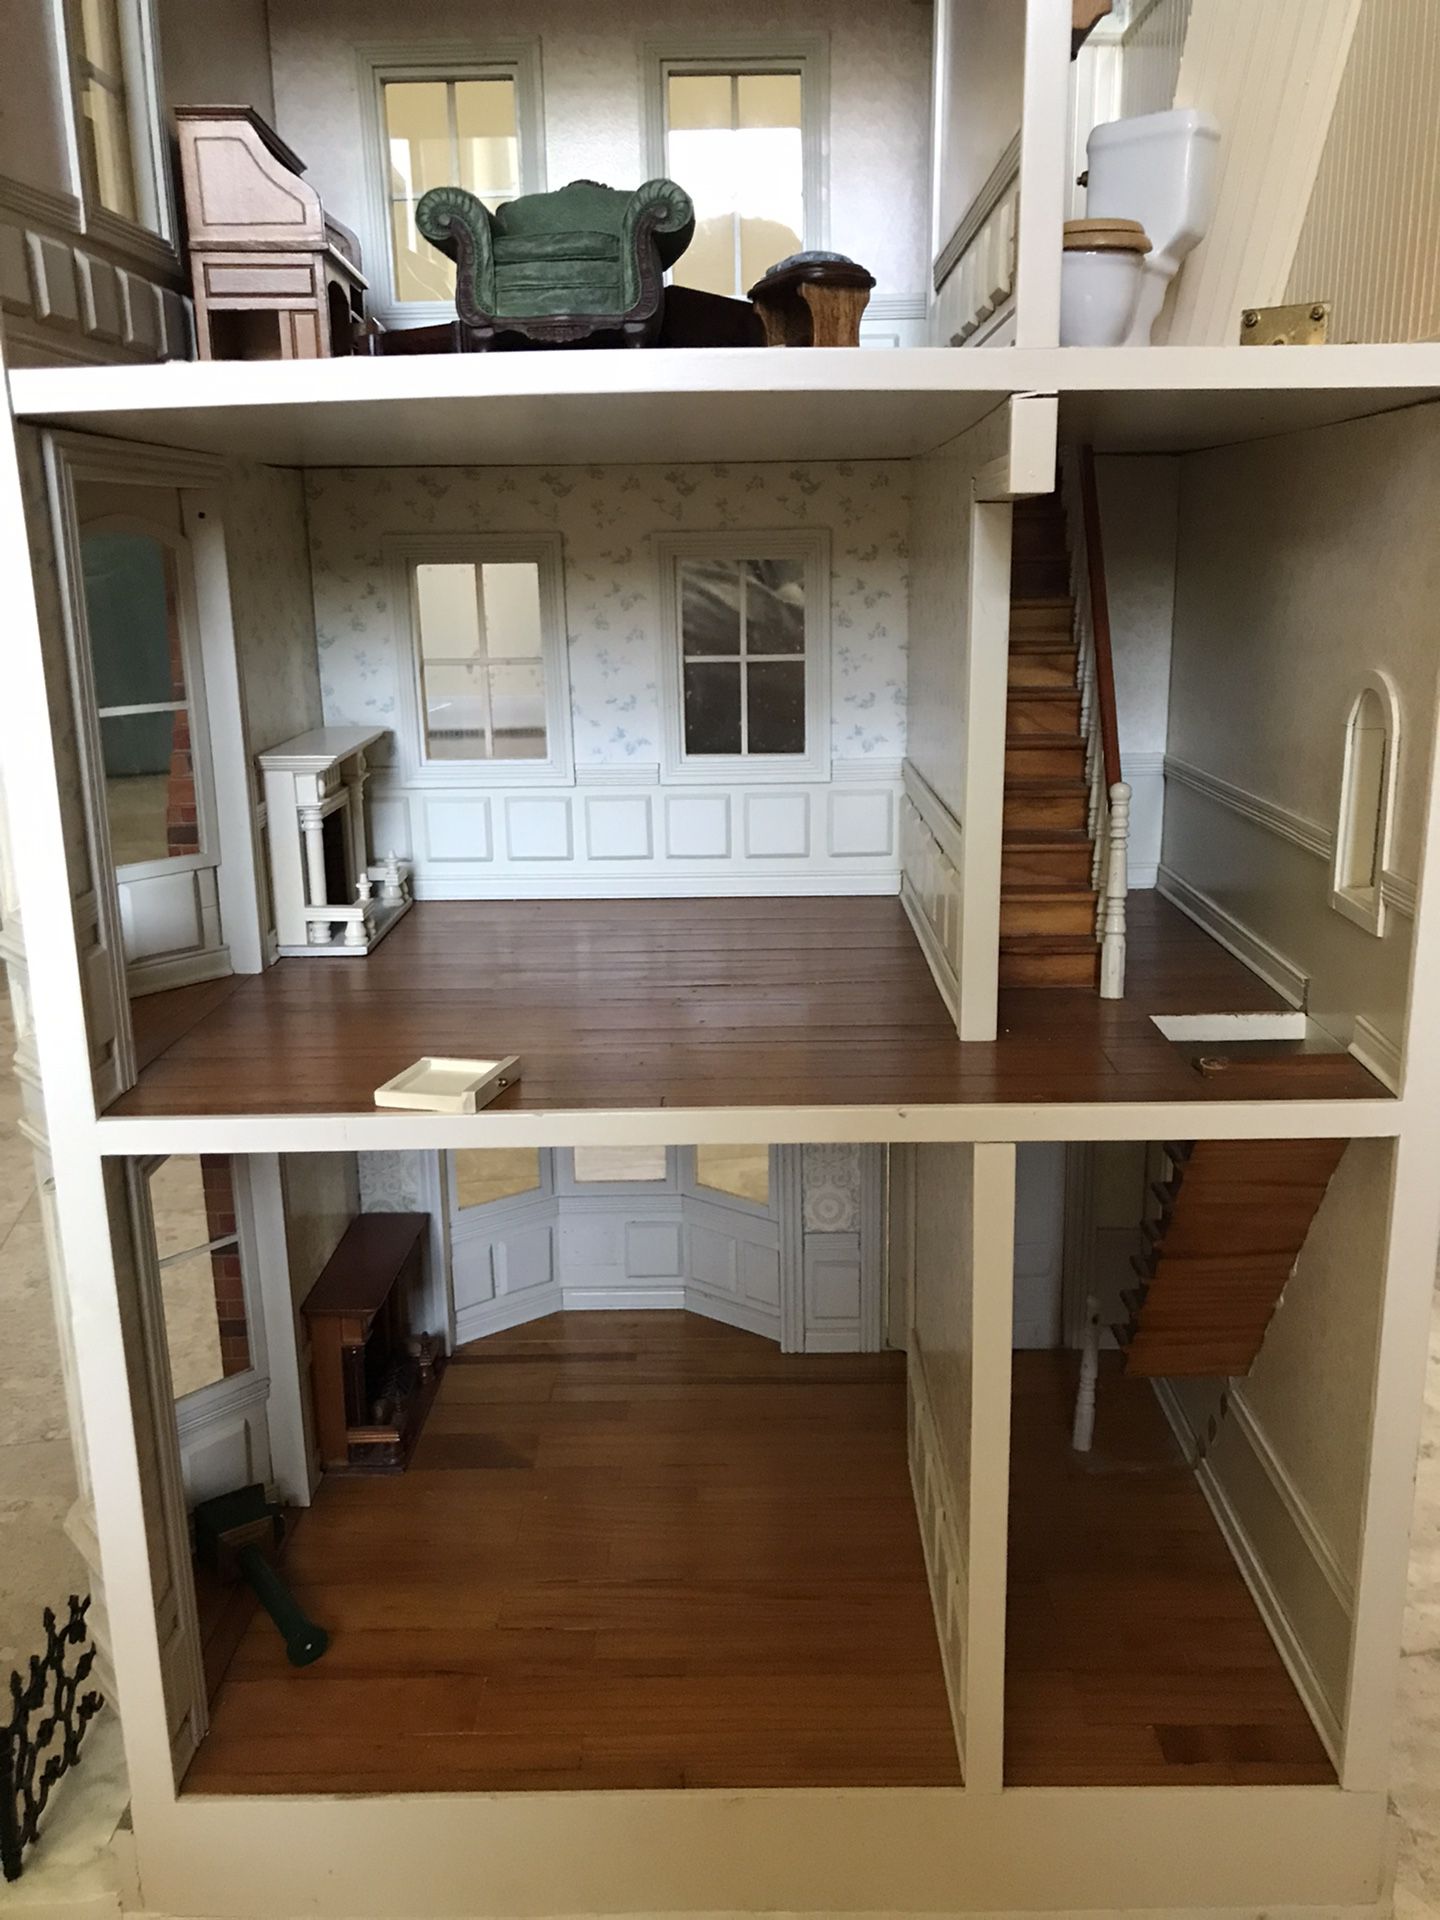 Memories Of Christmas Dollhouse for Sale in Salem, NH - OfferUp